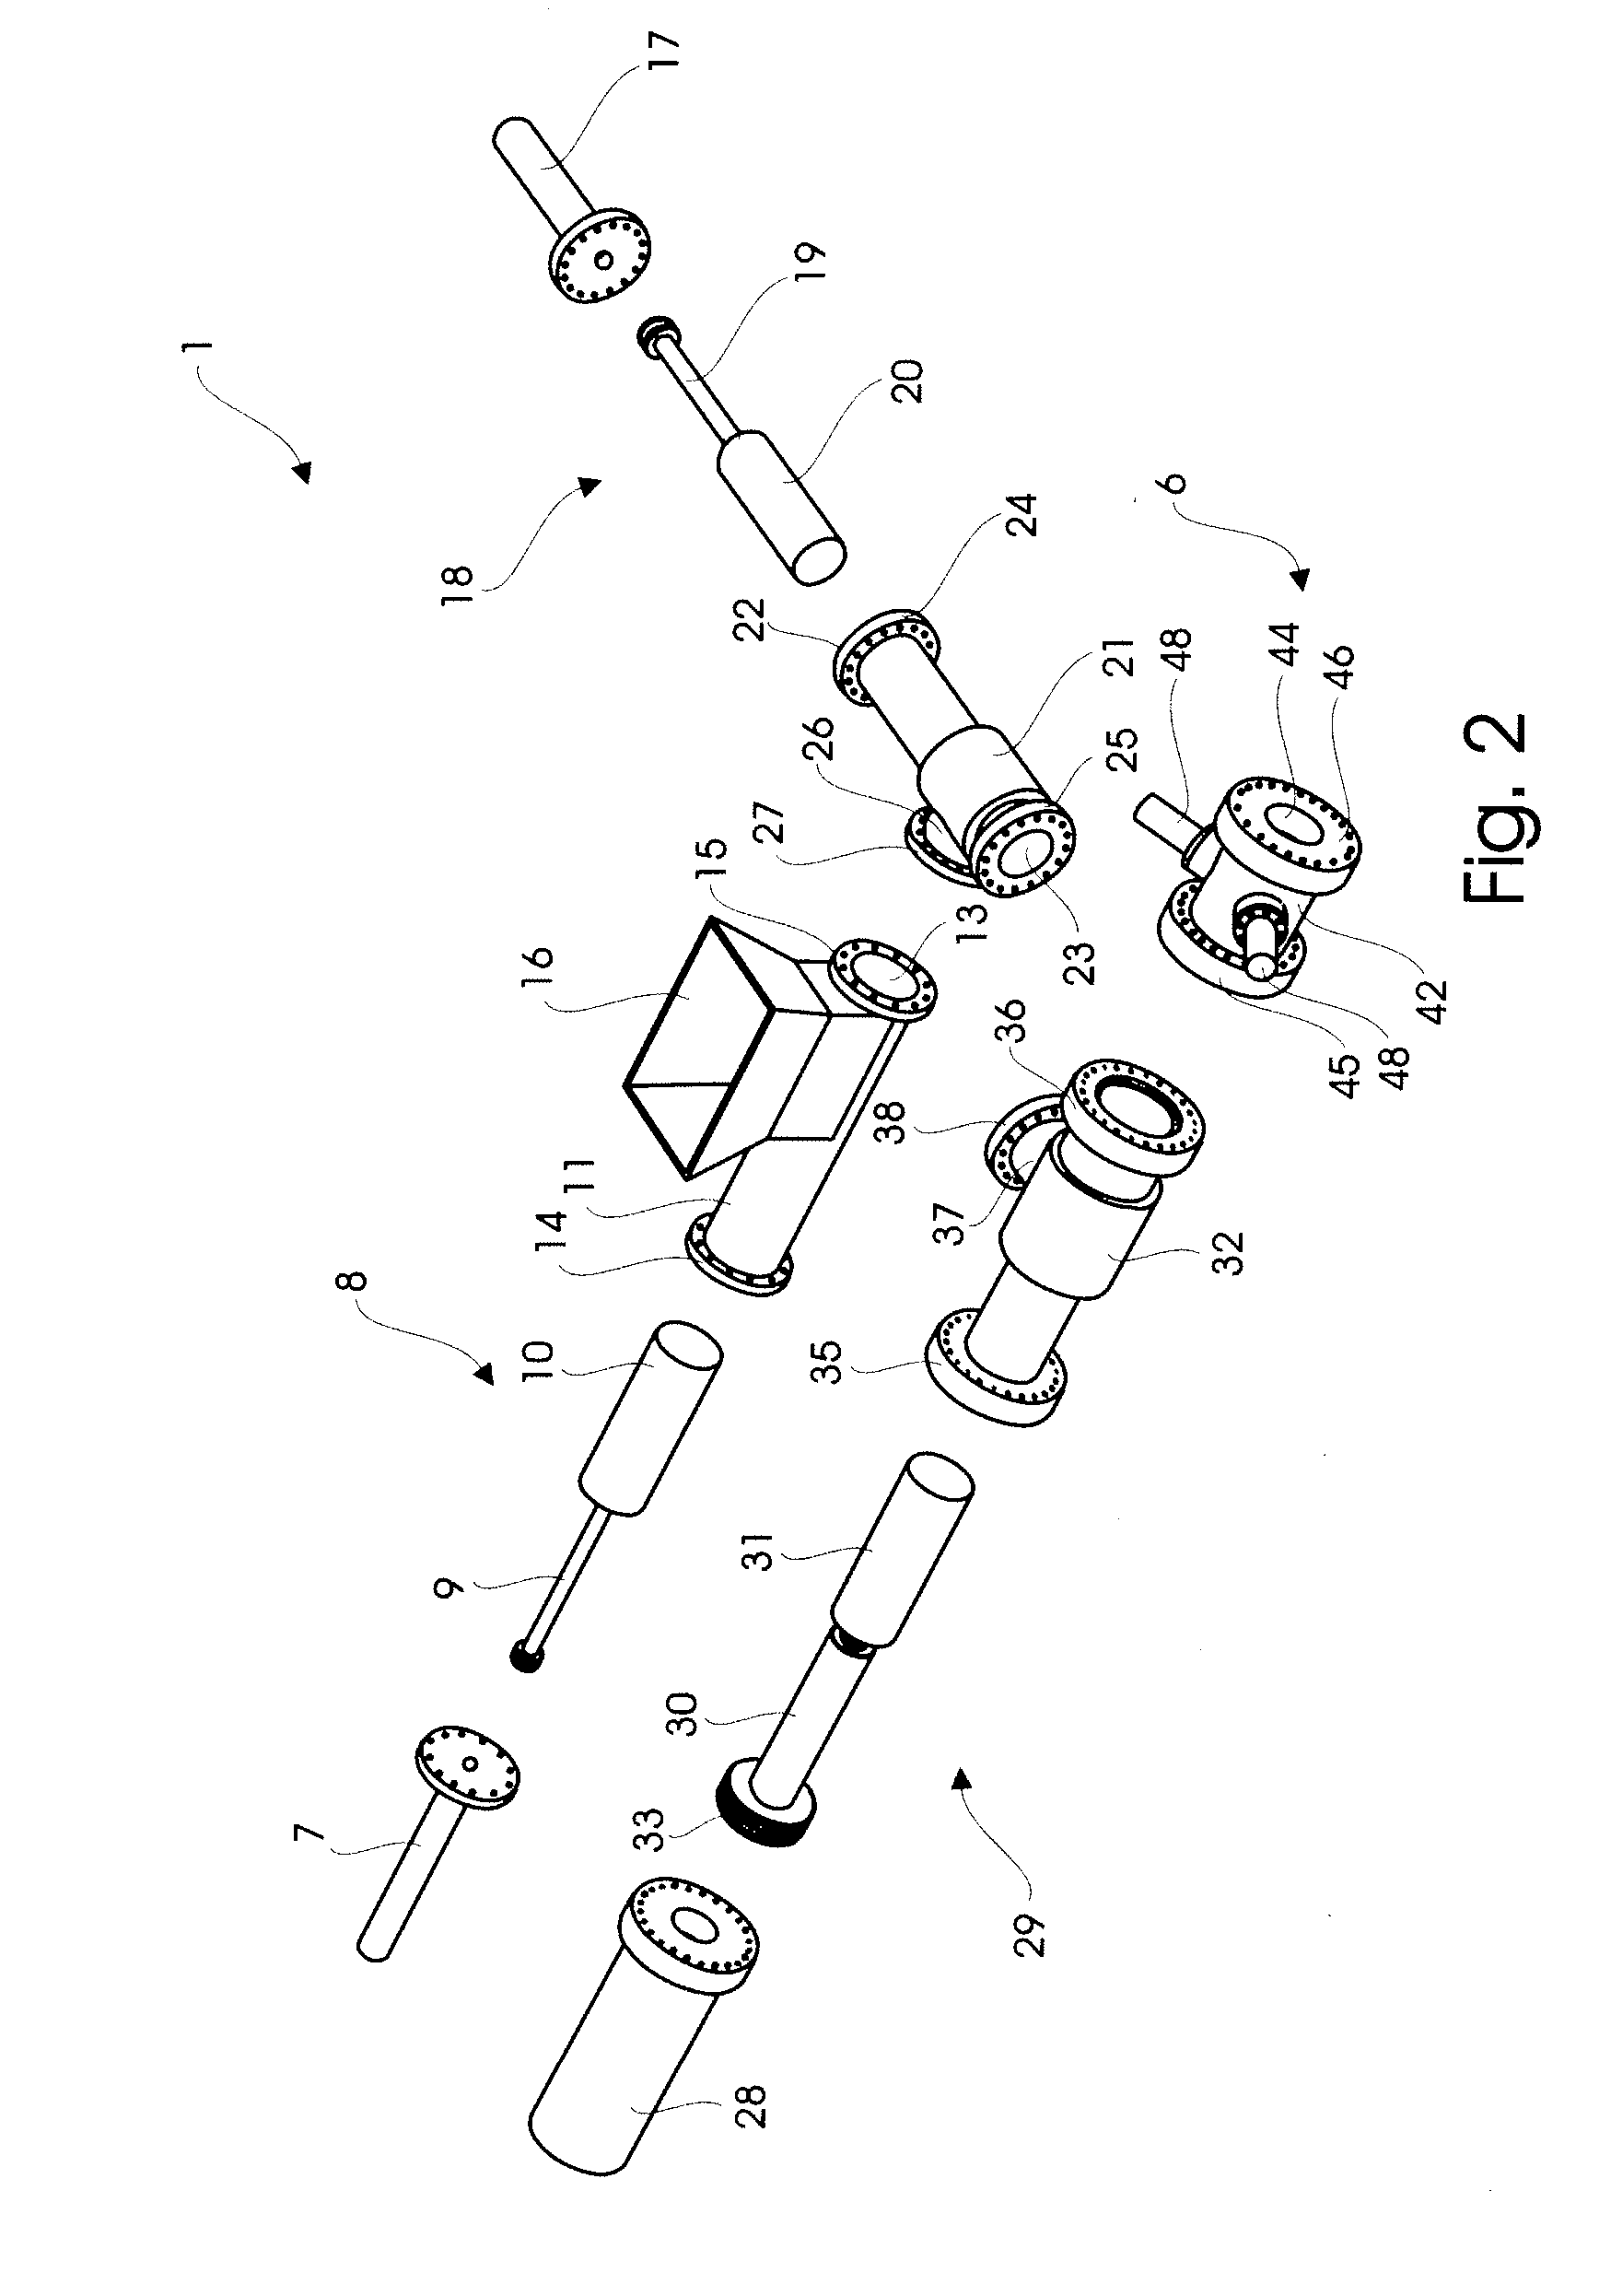 Feeding apparatus for creation of one or more plugs of compressible material for feeding into a gasifier or reactor